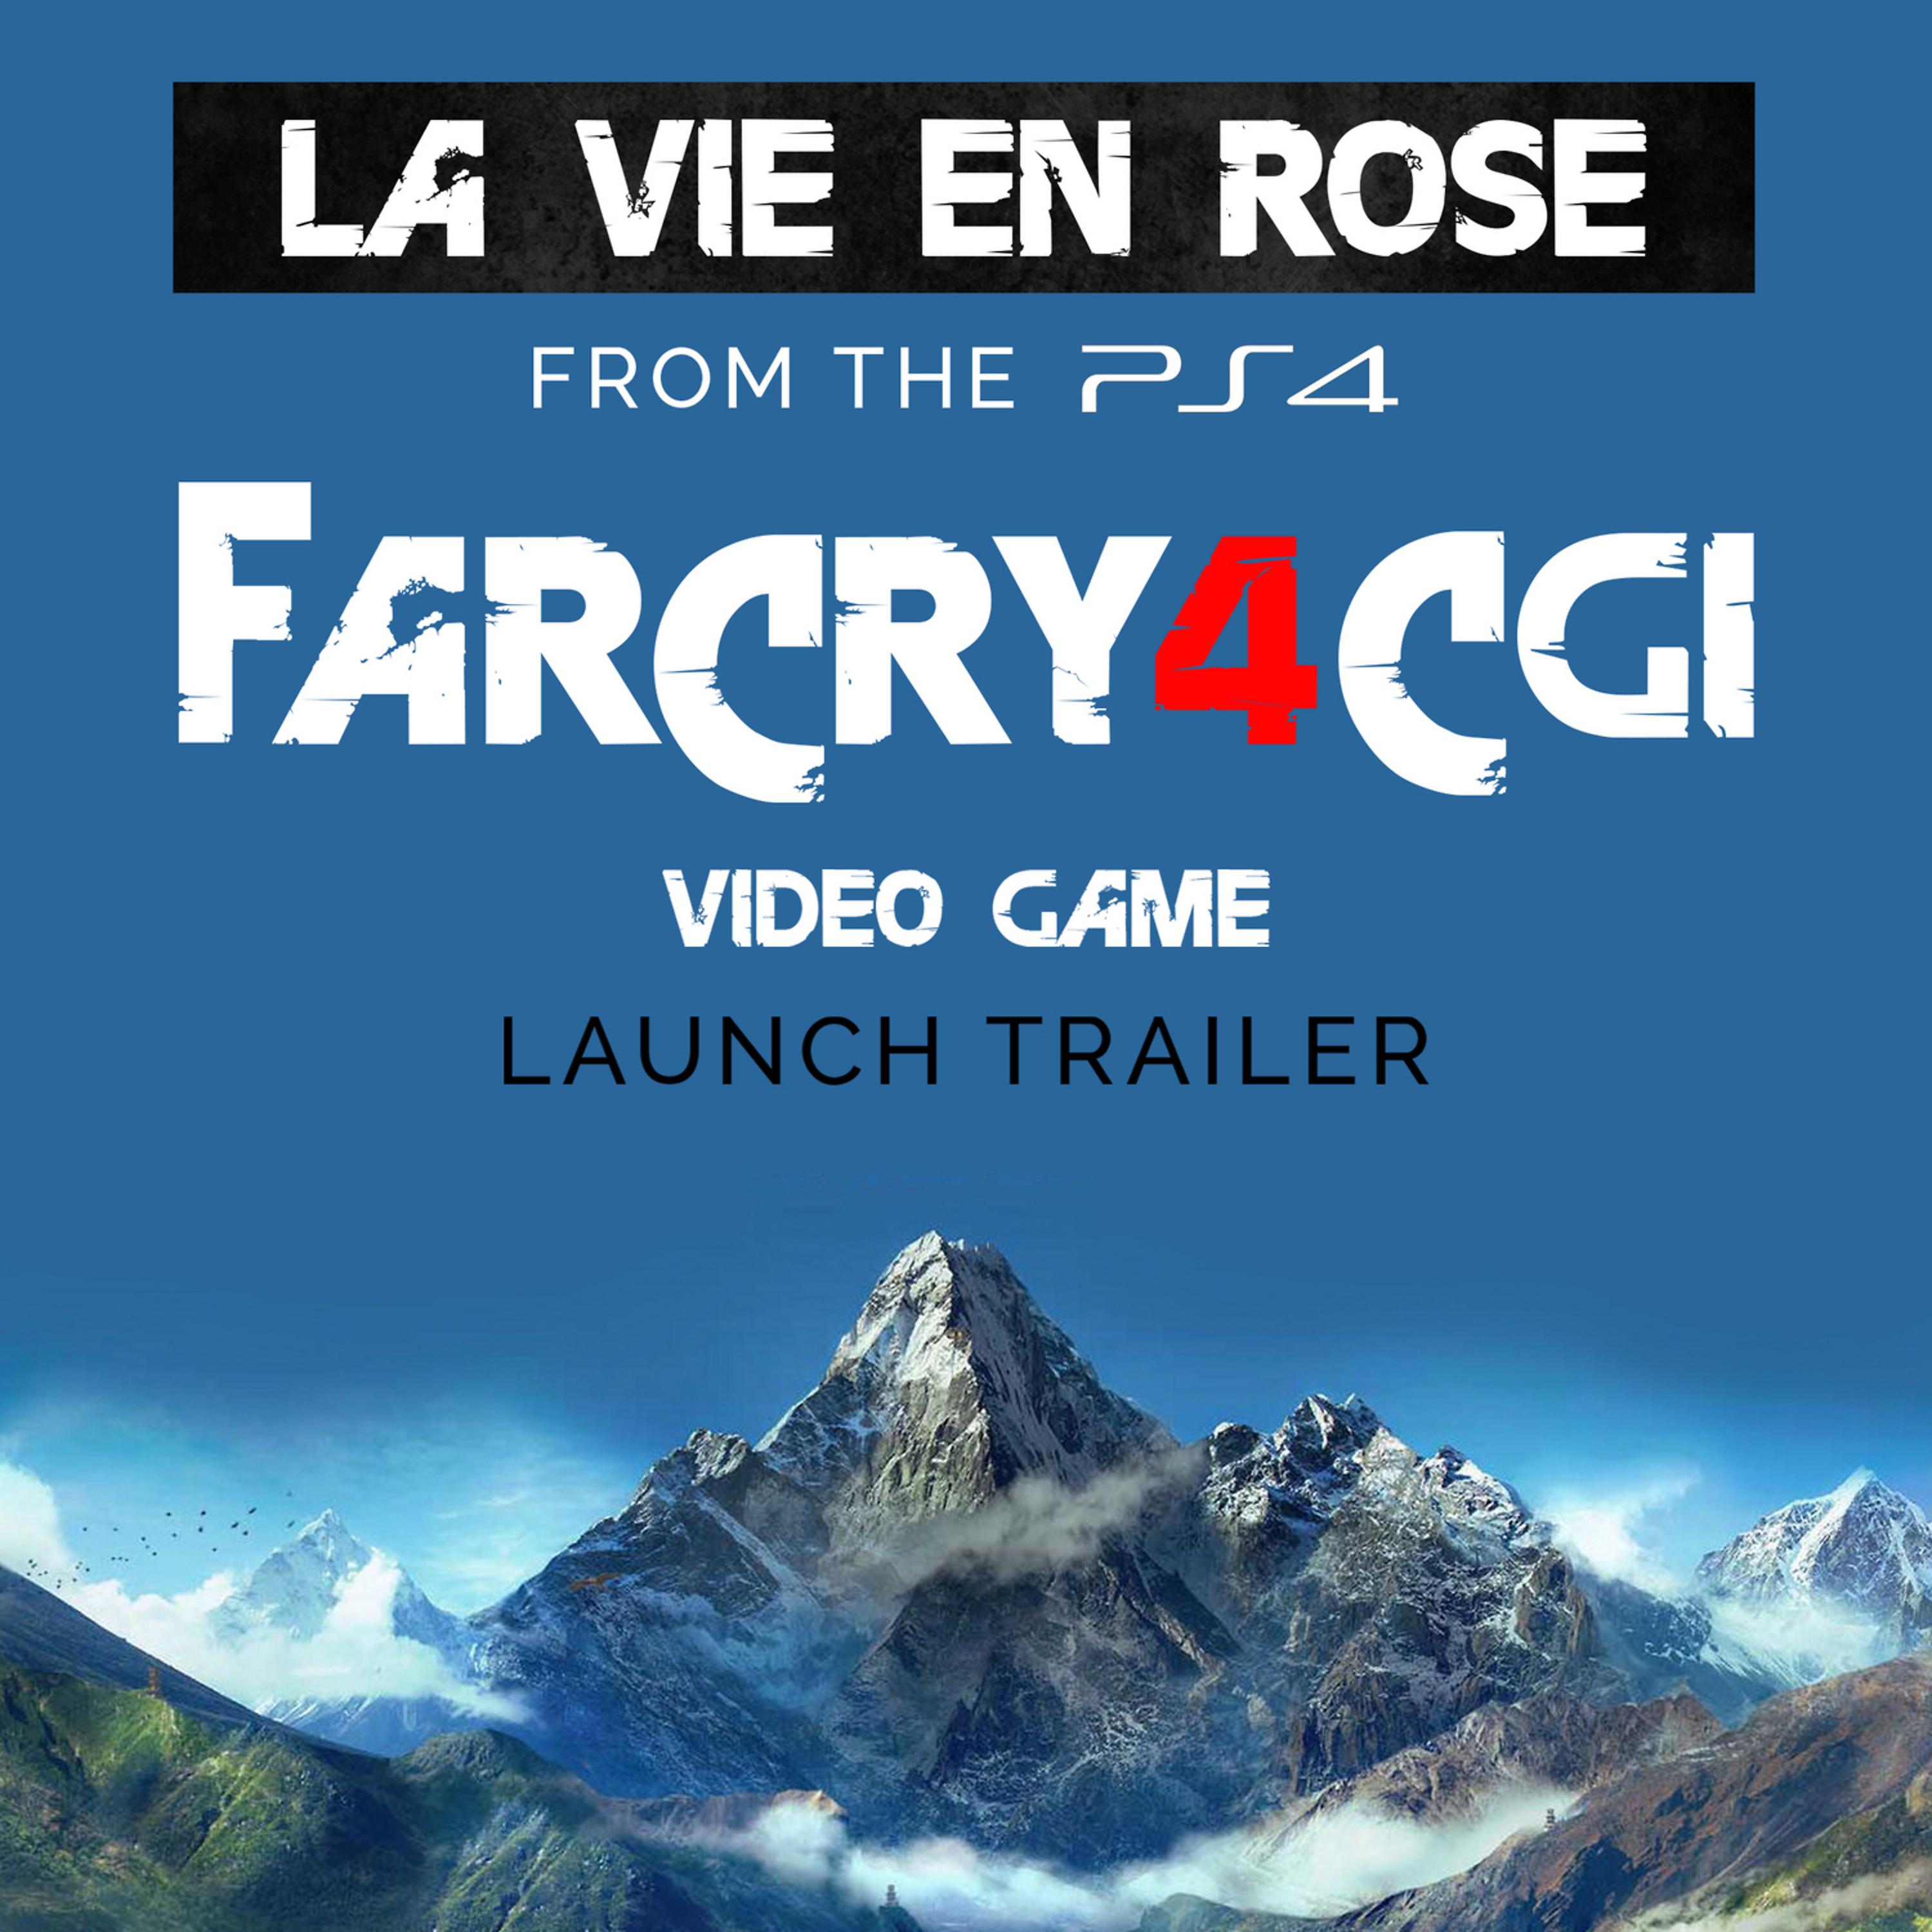 Постер альбома La vie en rose (From the PS4 "Far Cry 4 CGI" Video Game Launch Trailer) - Single